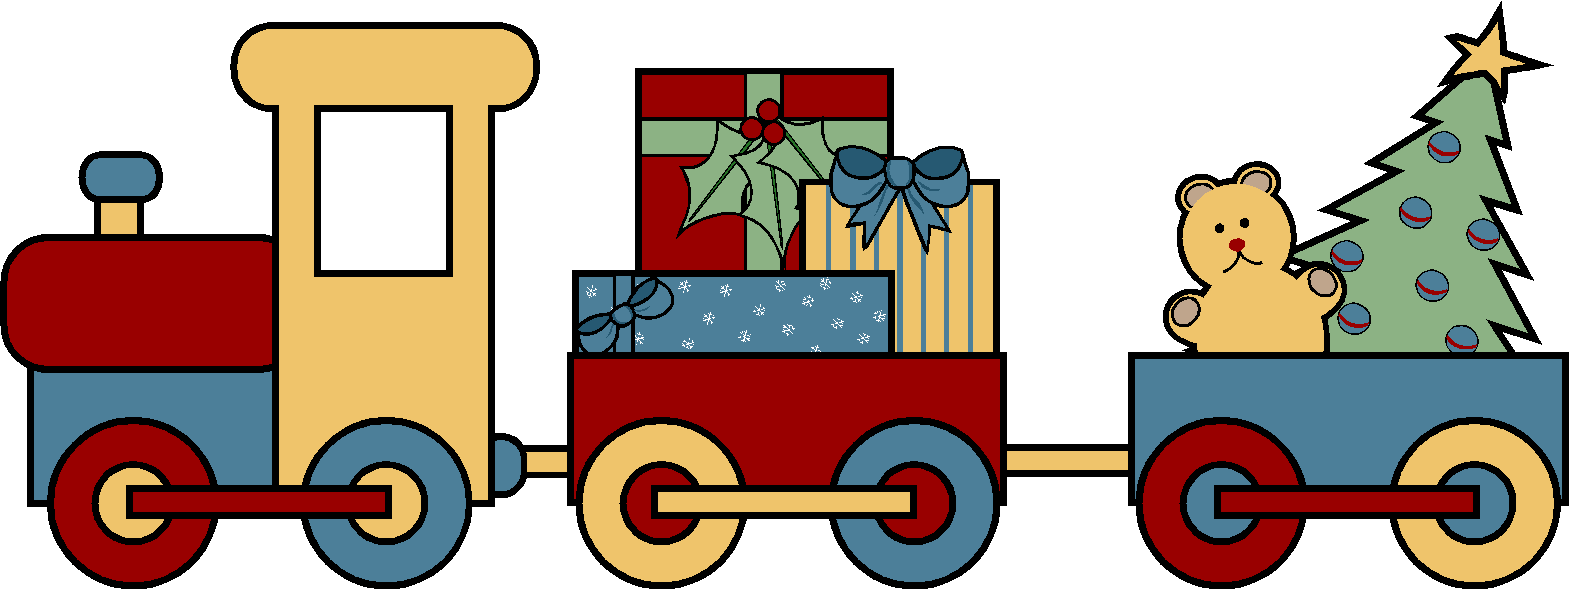 Gift clipart toy. Image of choo train